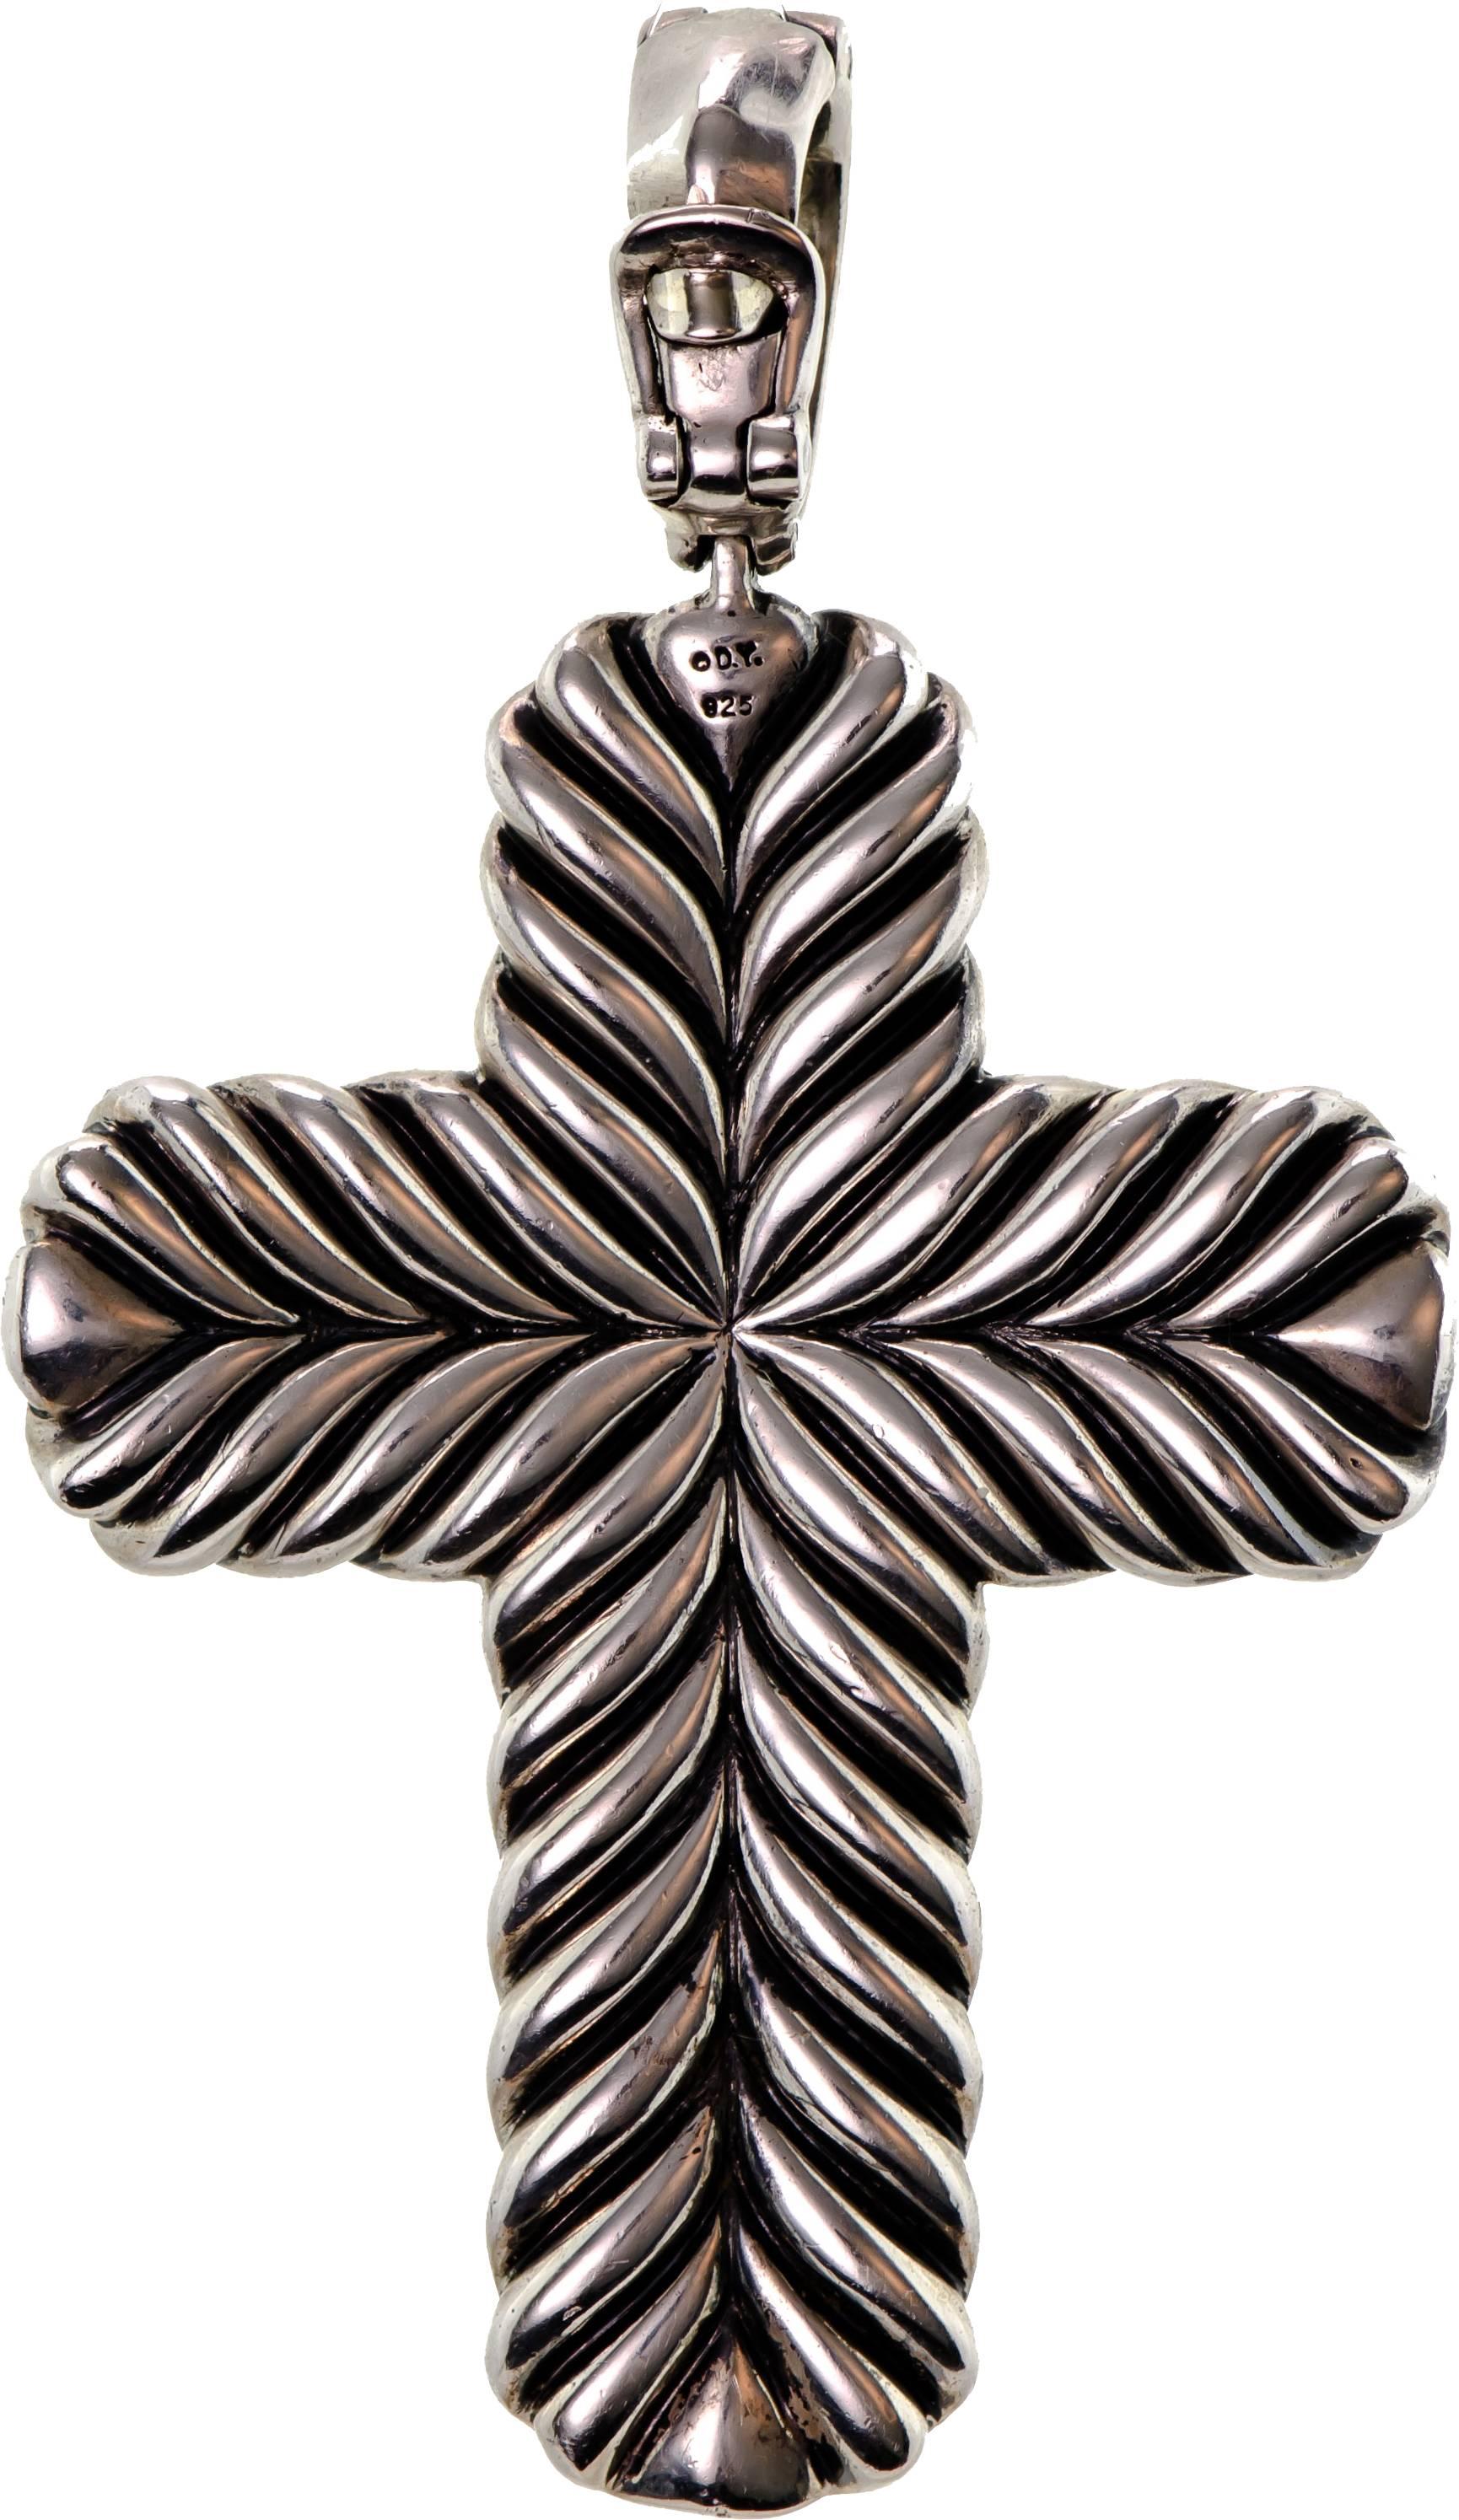 Large size David Yurman black diamond and silver cross pendant - set with 14 plus carats of round black diamonds into a heavy sterling silver mount - Reverse: Chevron Decoration - Bail - black diamond set and opens as an enhancer - Piece measures